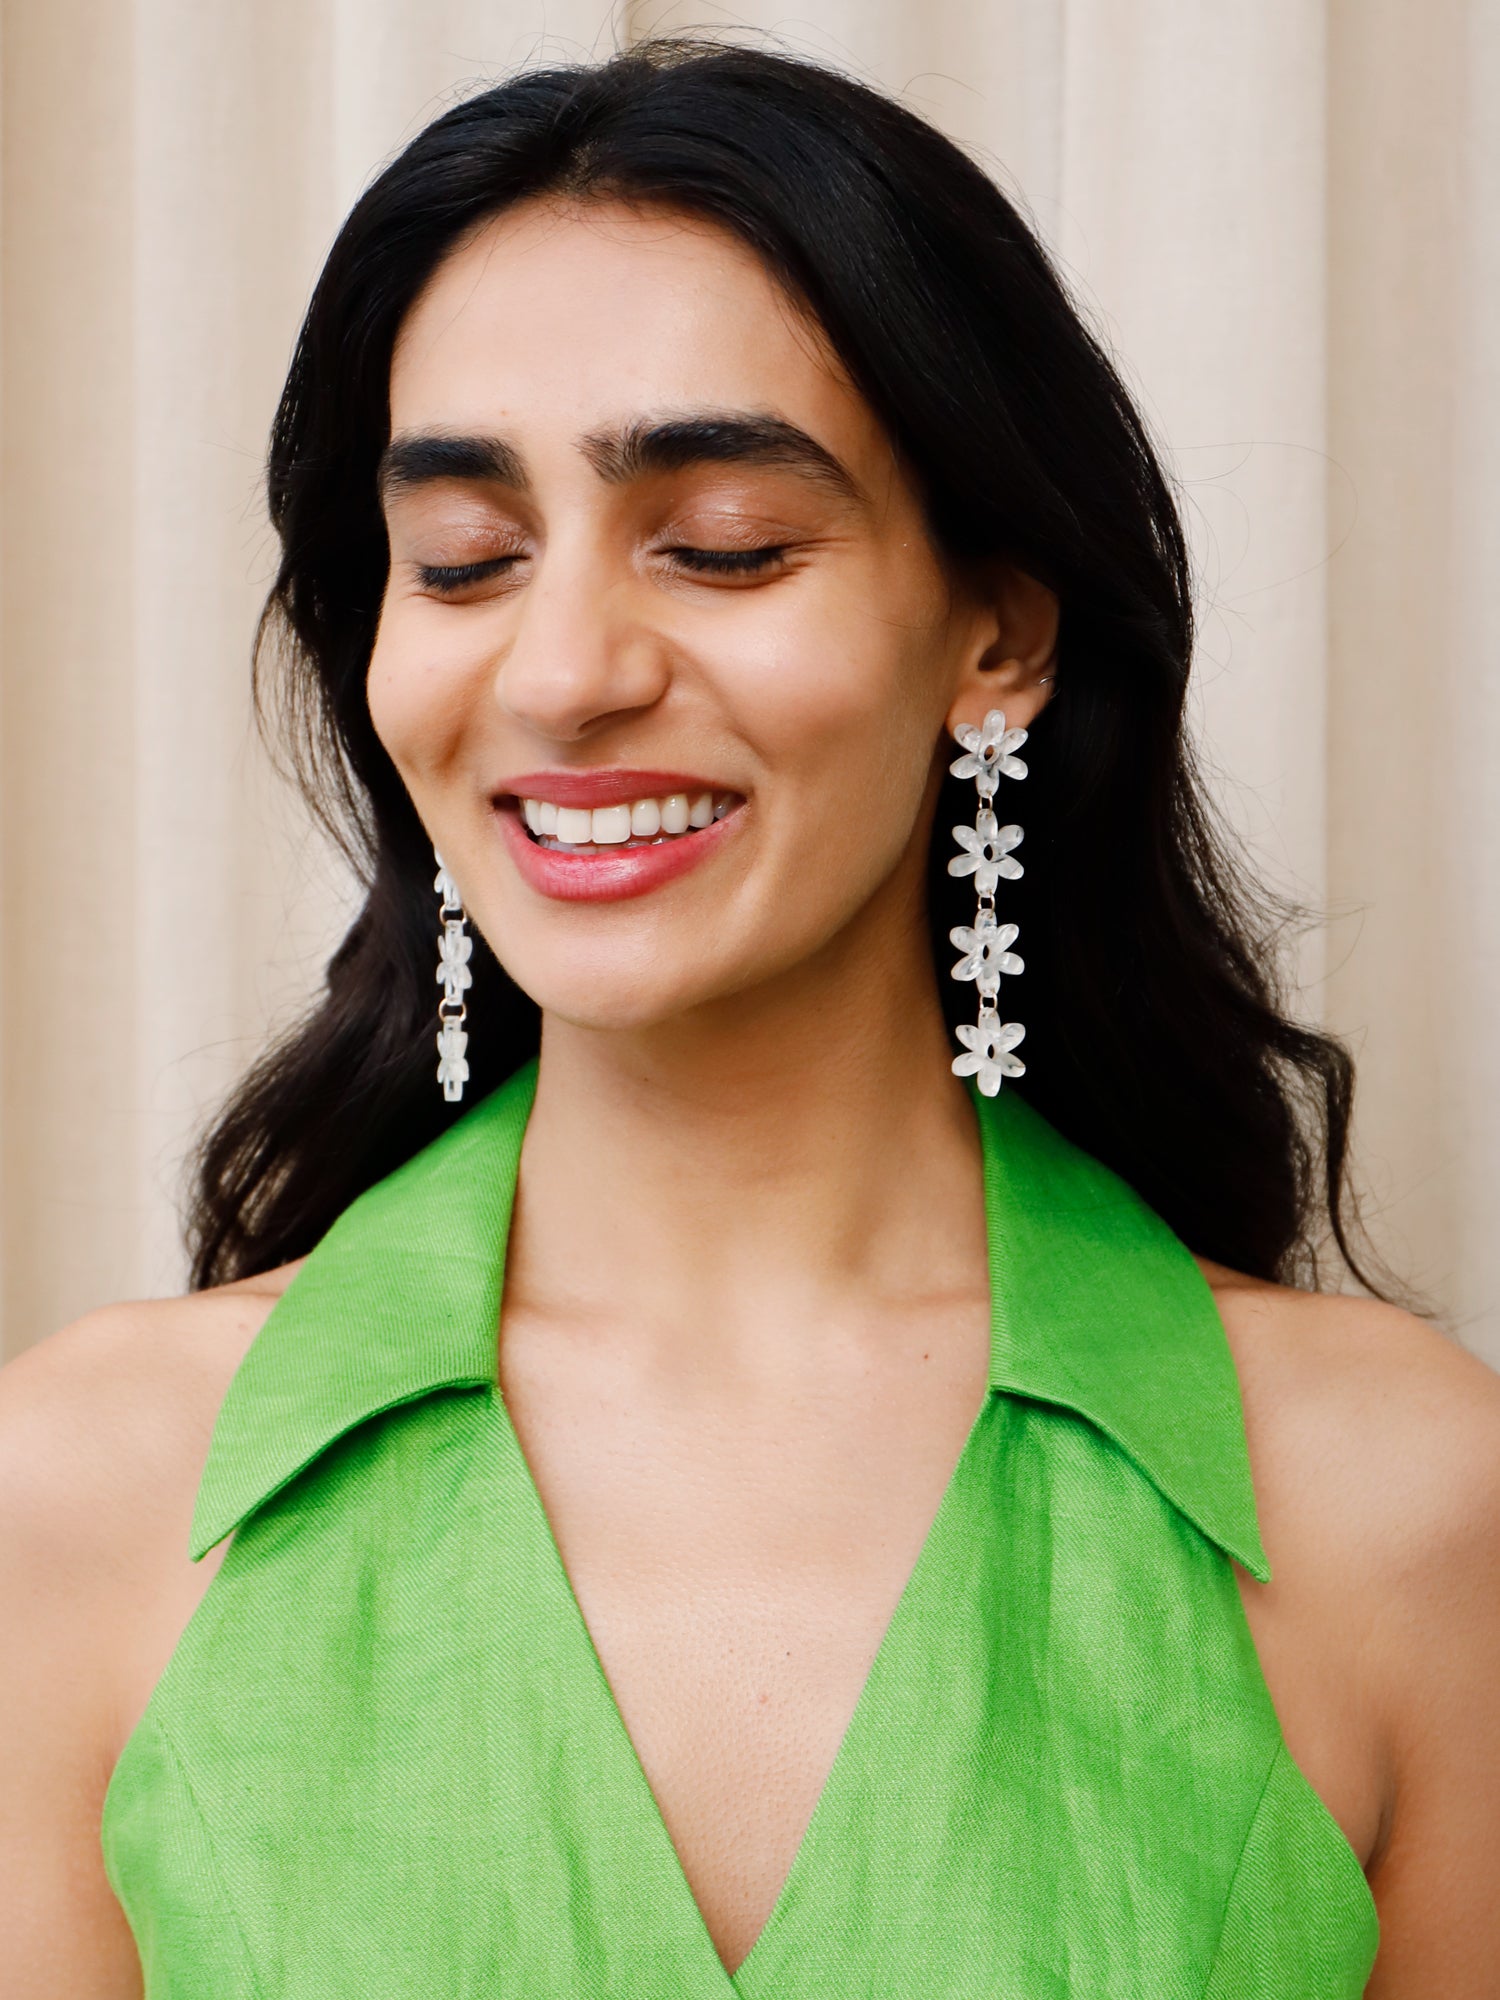 Connie Statement Earrings in Water Lily